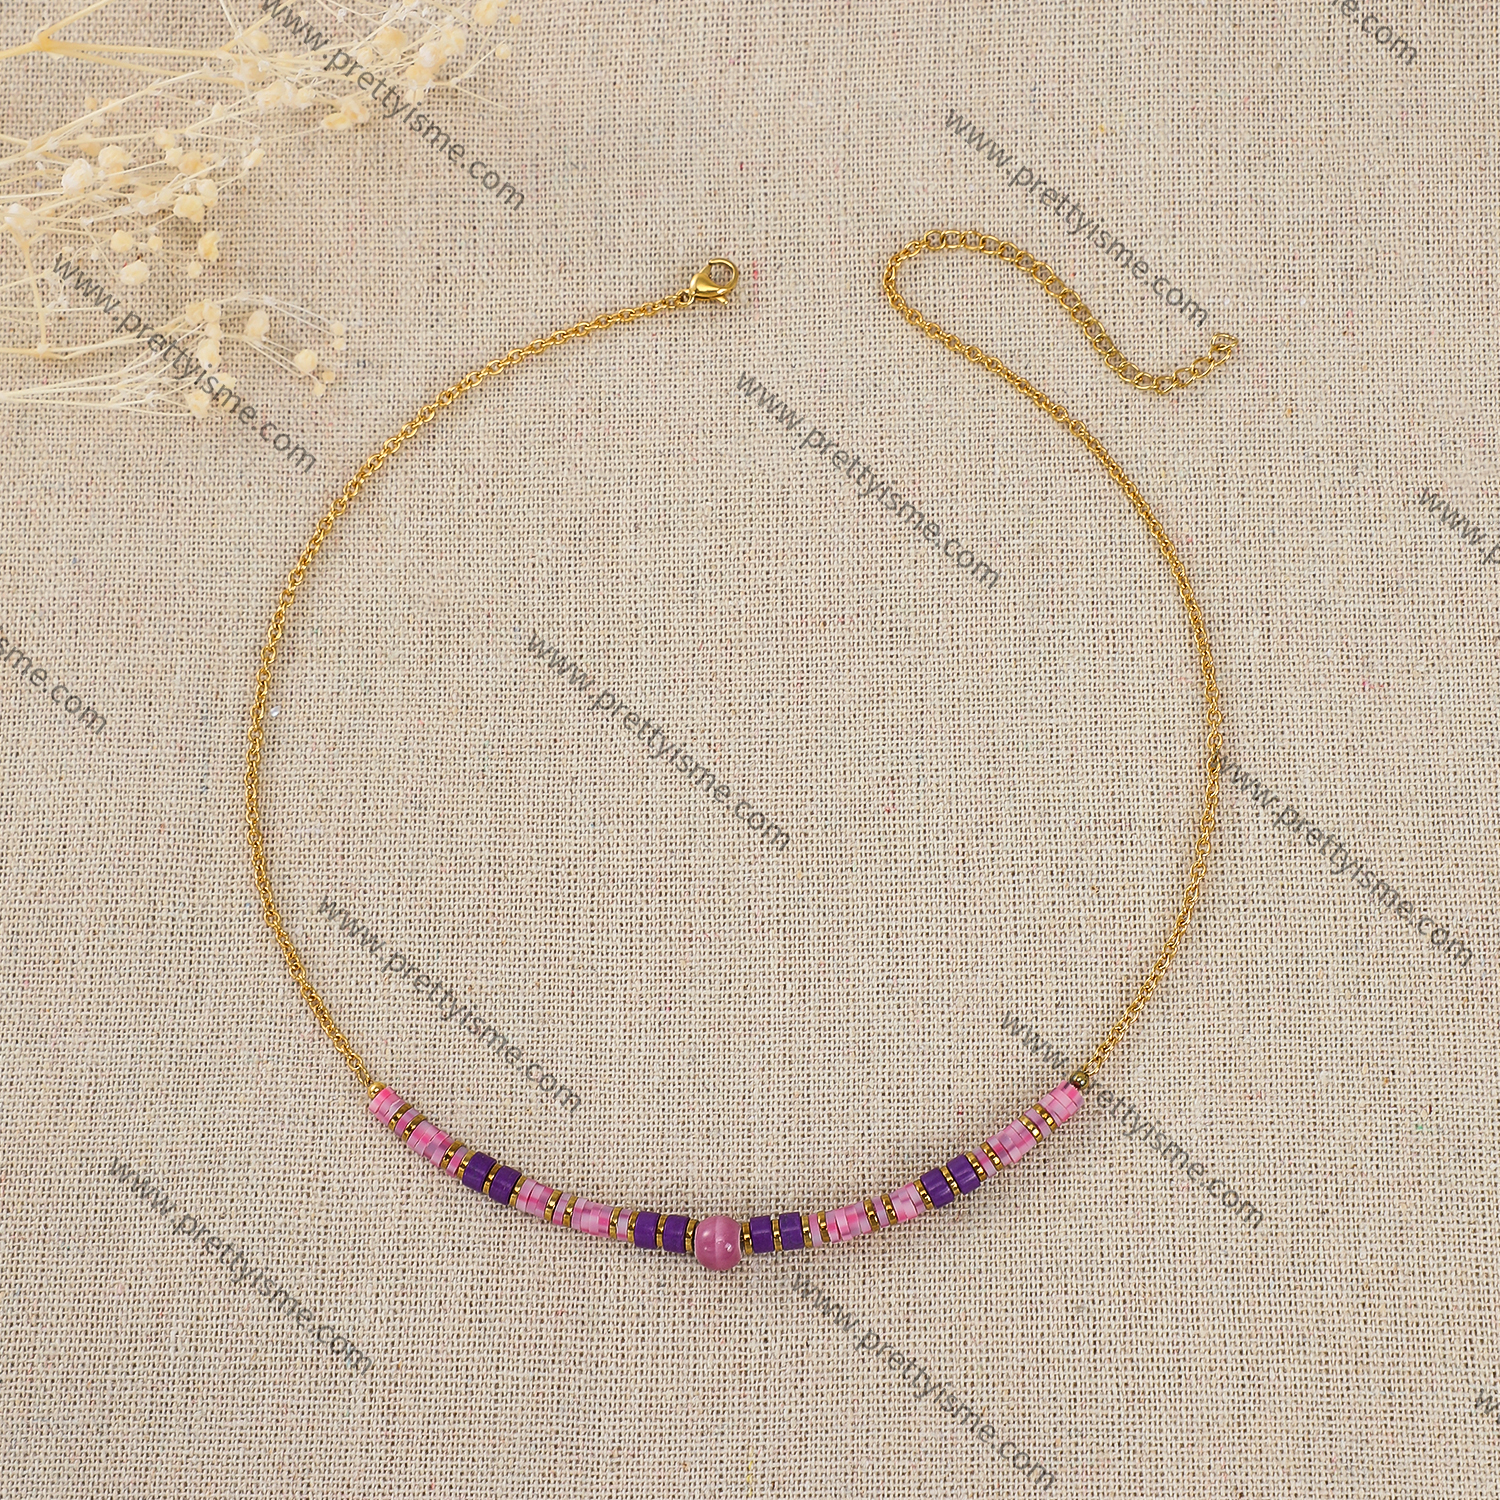 Pretty Is Me Collection Wholesale 18K Gold Plated Stainless Steel Beads Beaded Pink Purple Polymer Clay Choker Necklace Women (4).webp